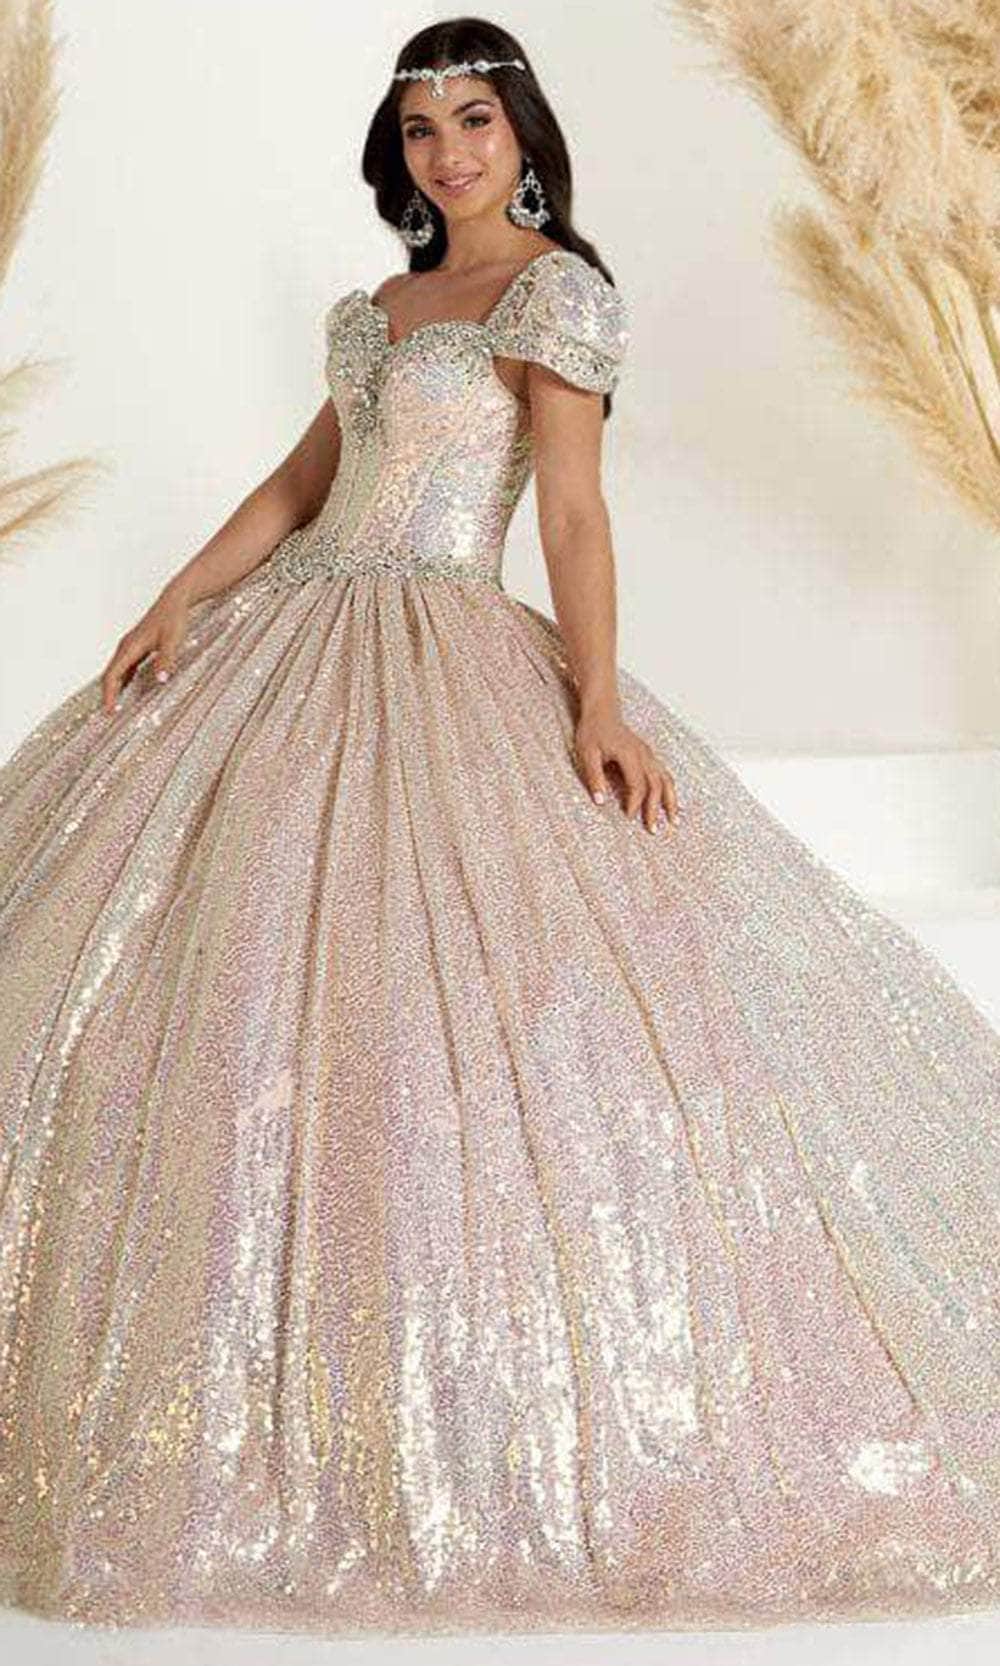 Fiesta Gowns 56450 - Sequined Off-shoulder Ballgown Special Occasion Dress